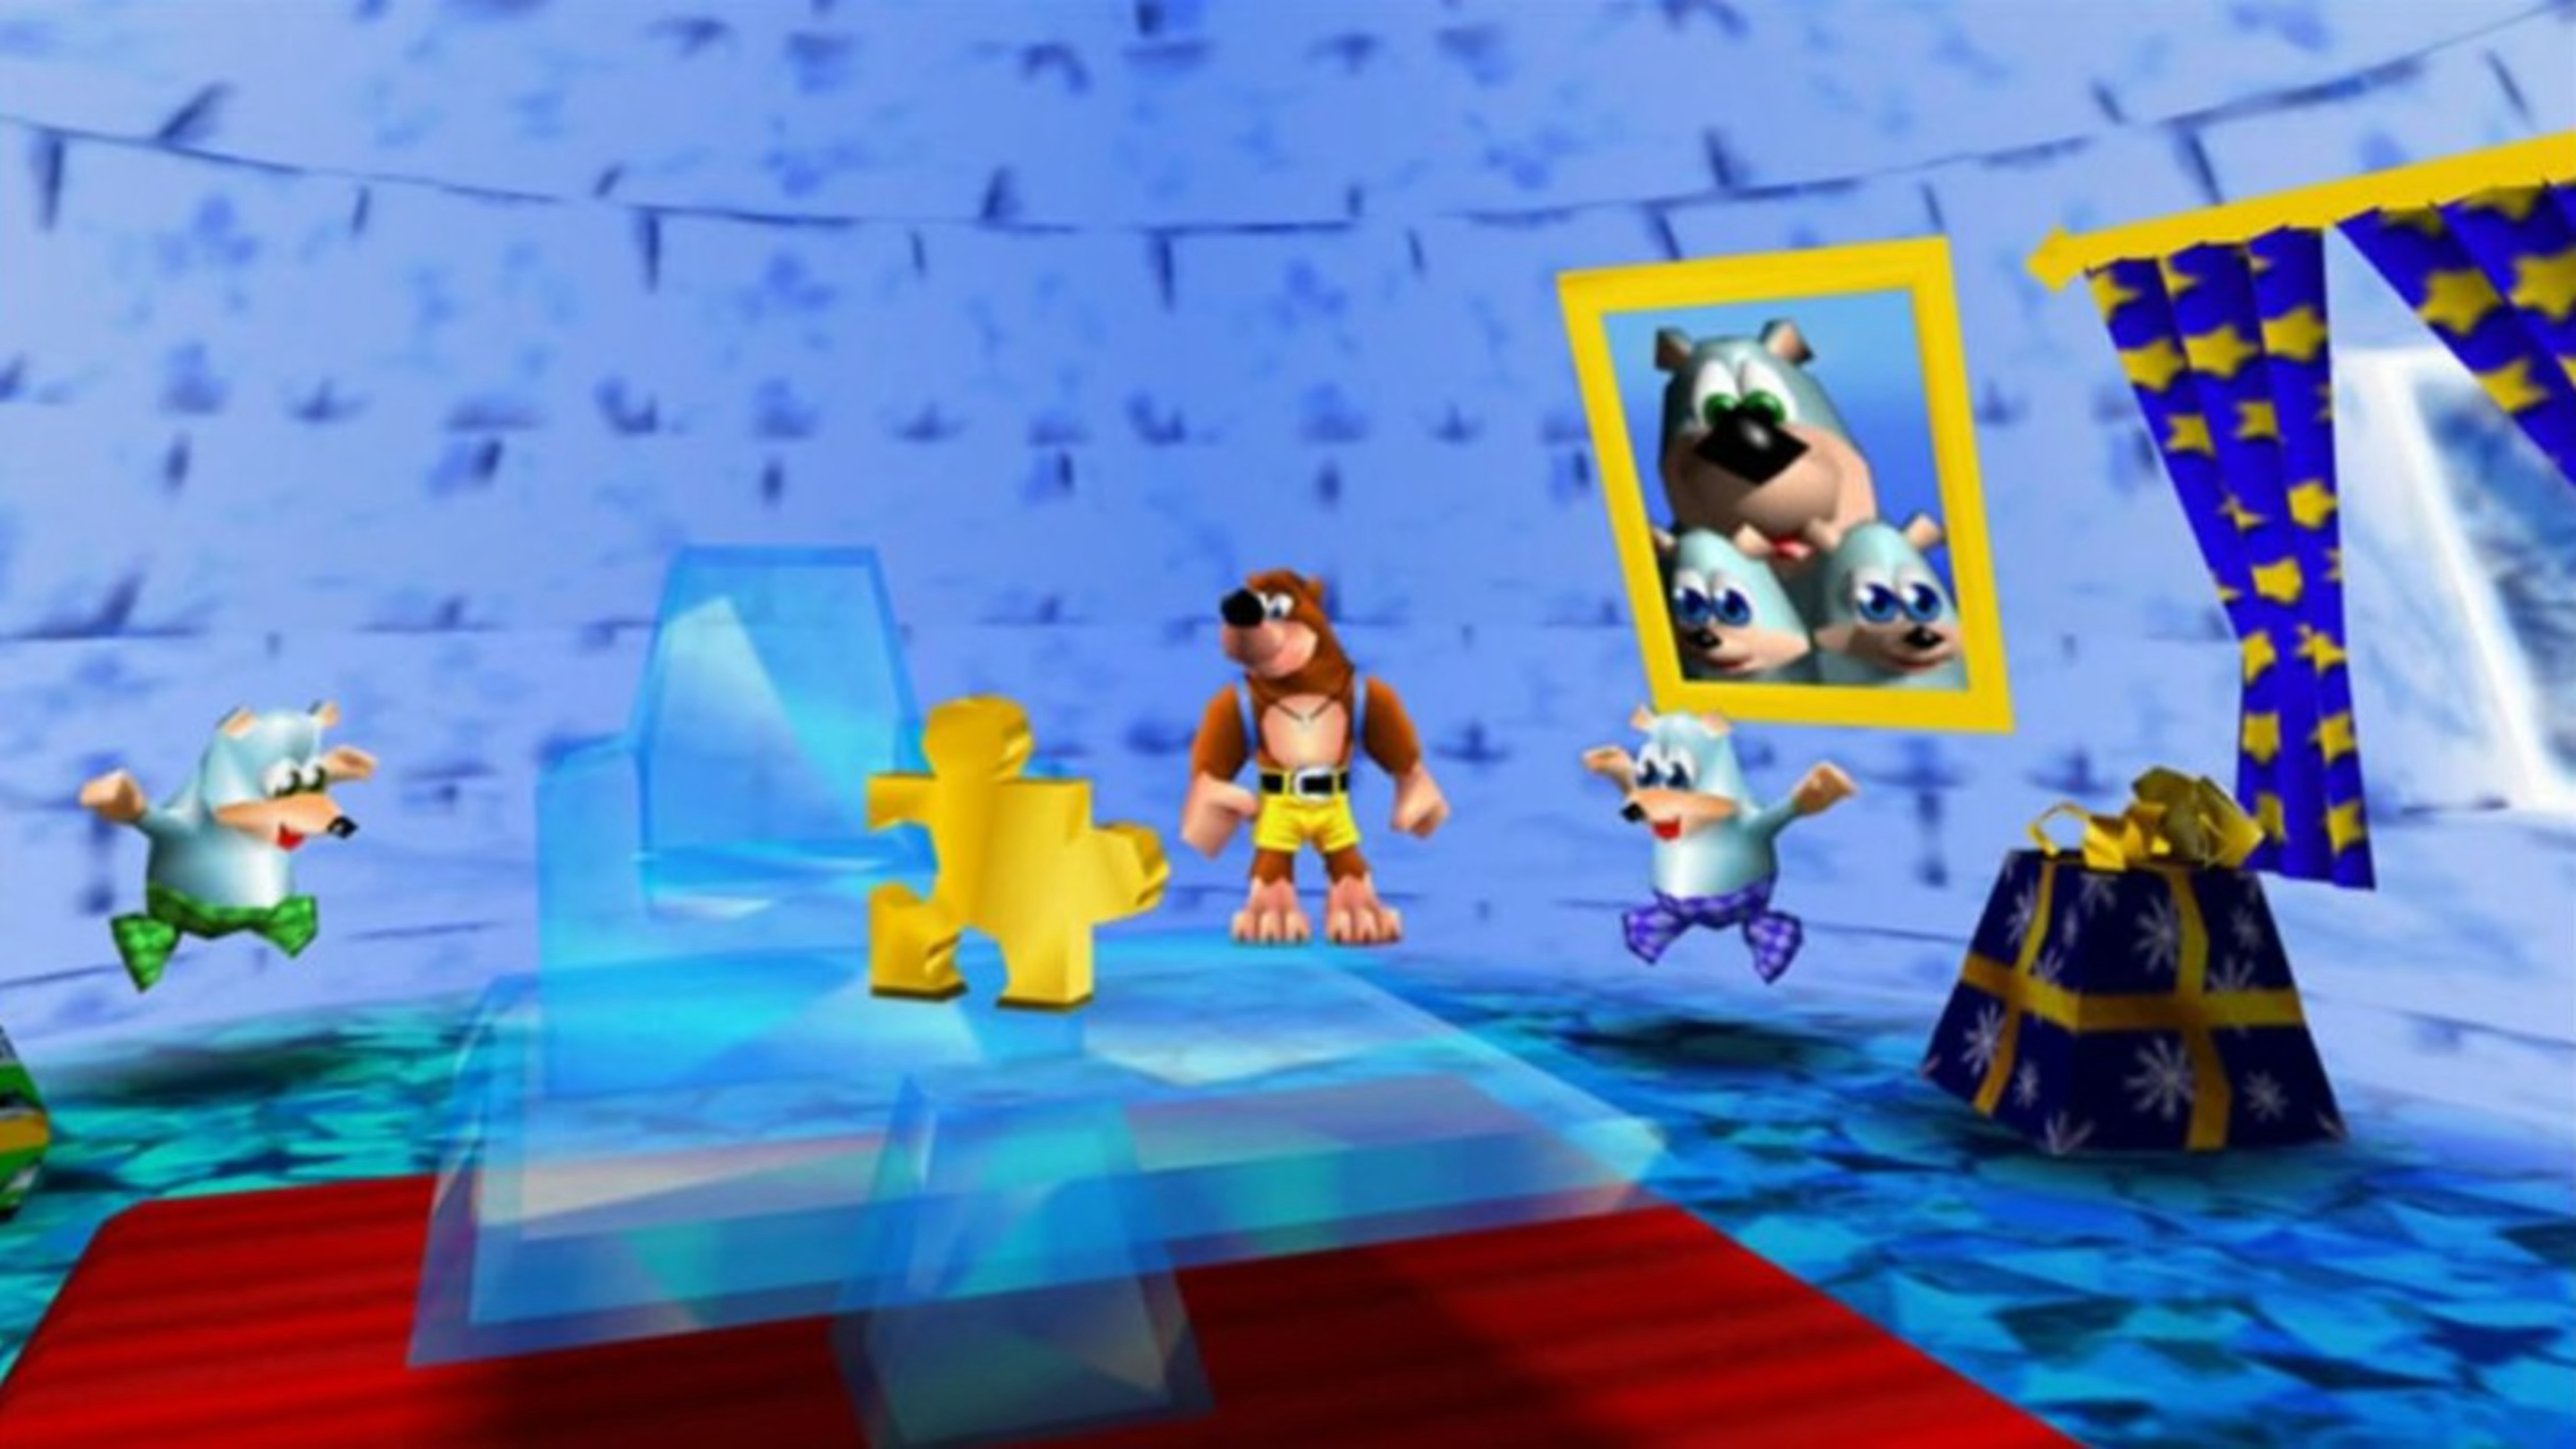 Banjo-Kazooie developers think it's unlikely the franchise will